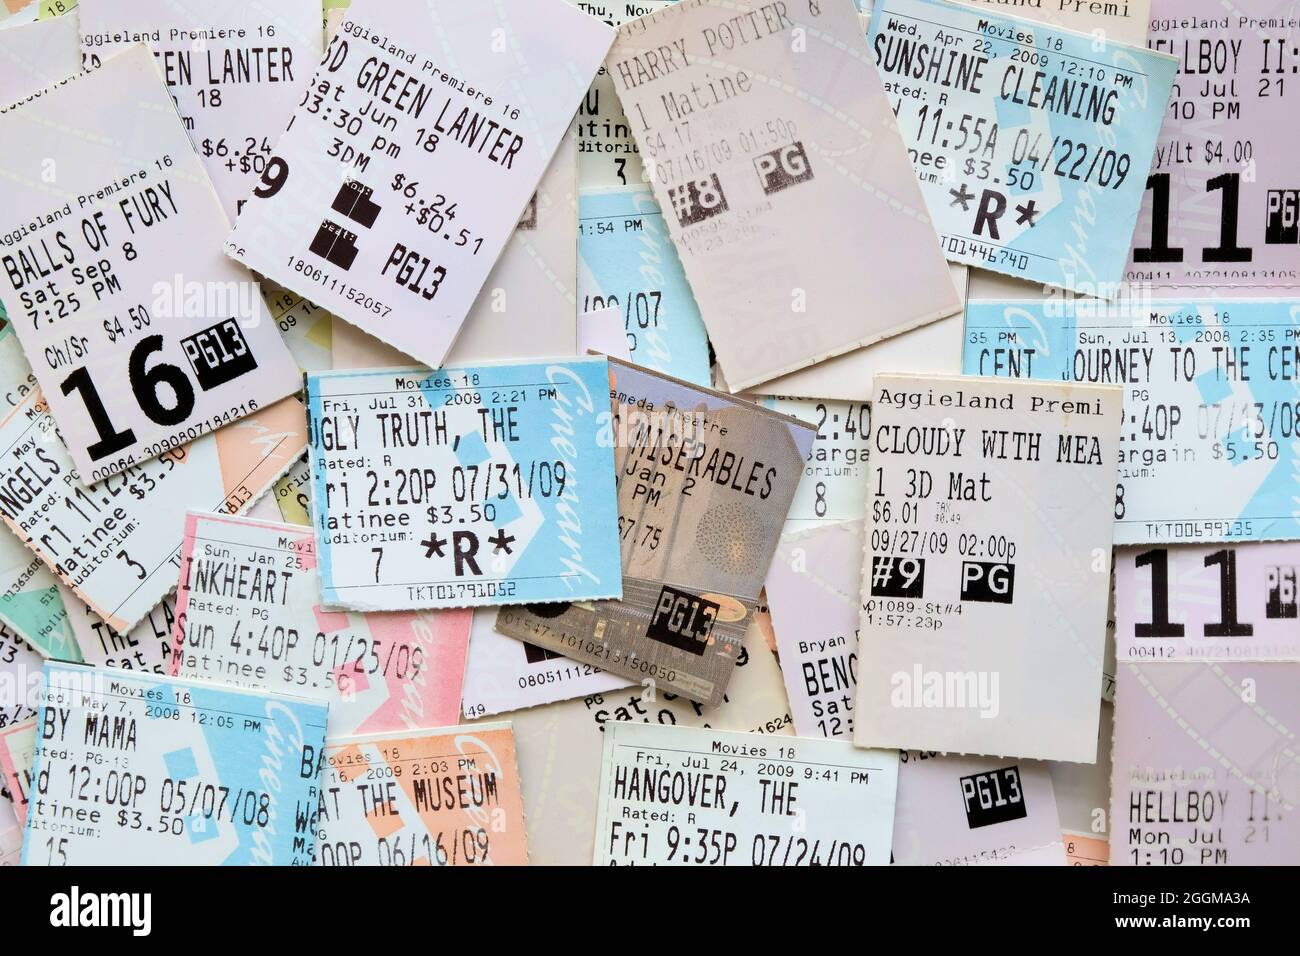 Assorted collection of movie theater ticket stubs for screenings and viewing of Hollywood movies at various theaters and movie houses. Stock Photo